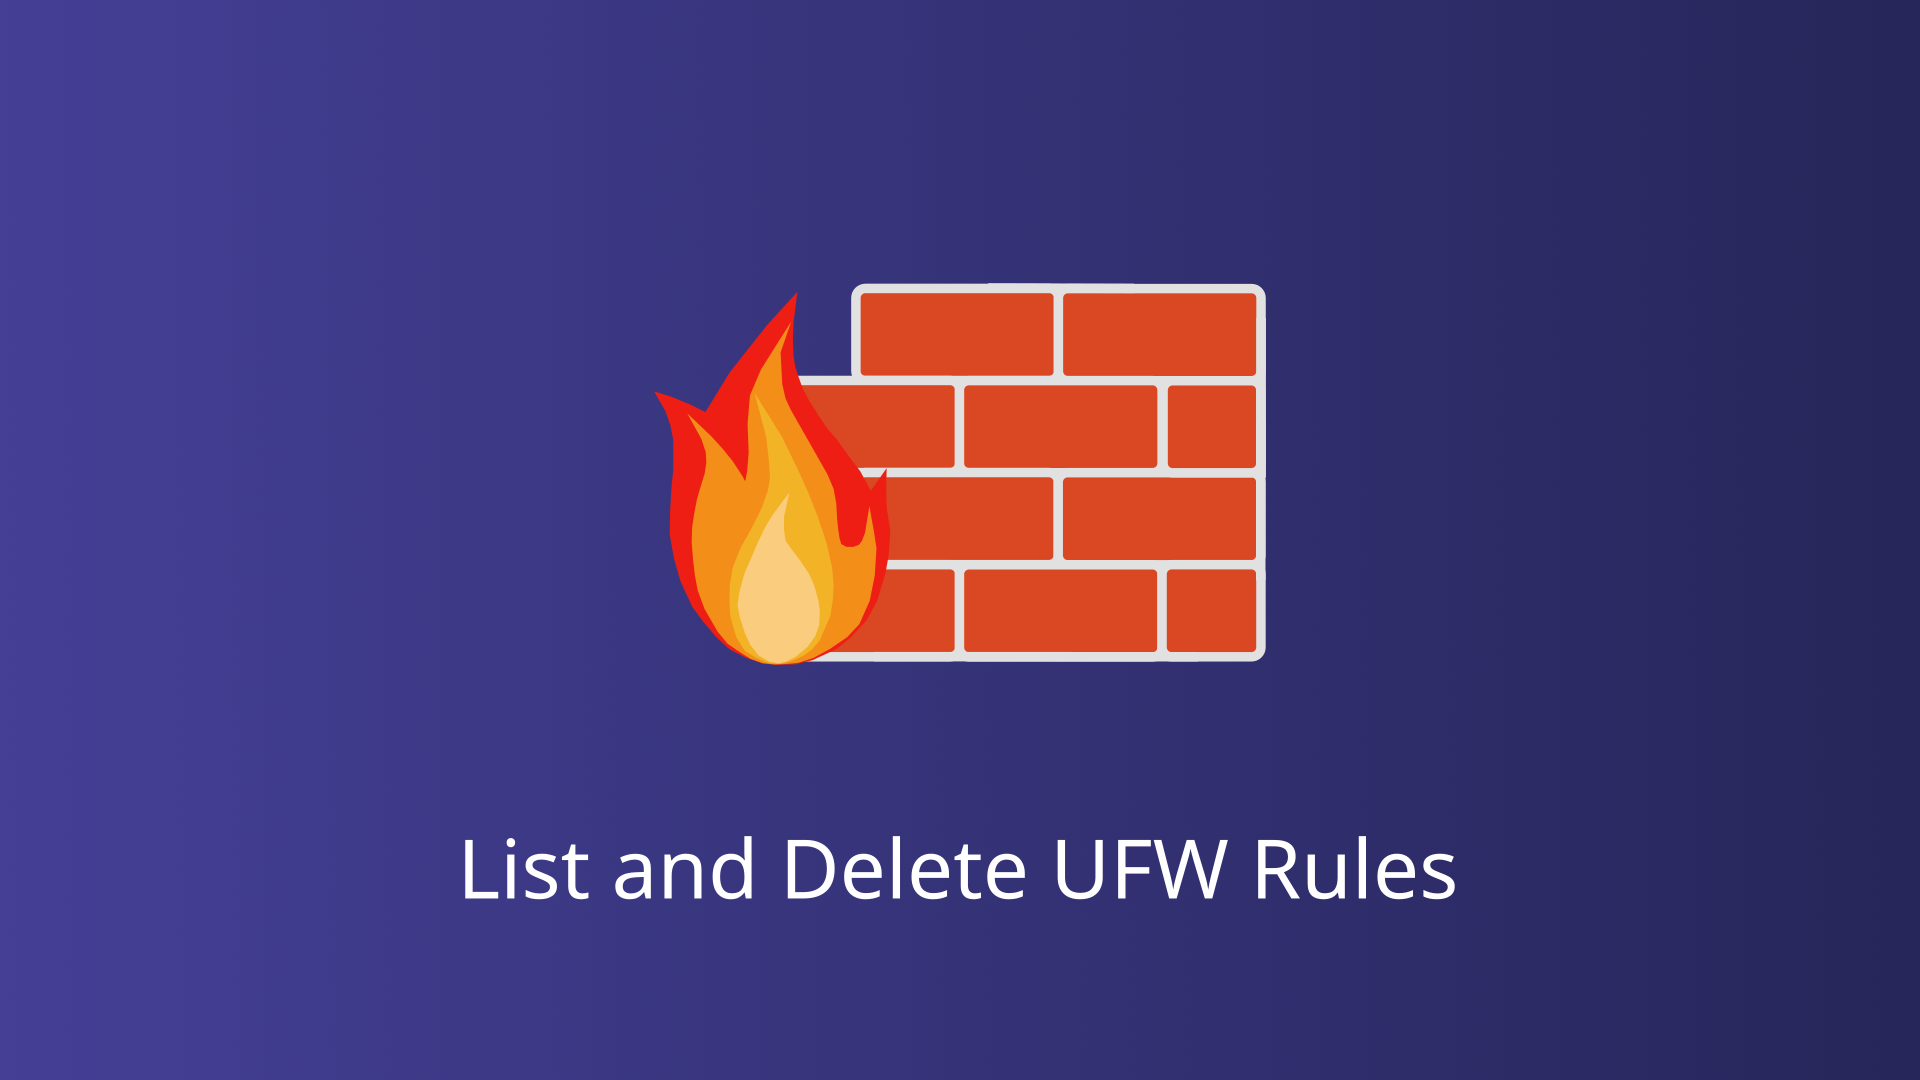 List and Delete UFW Rules